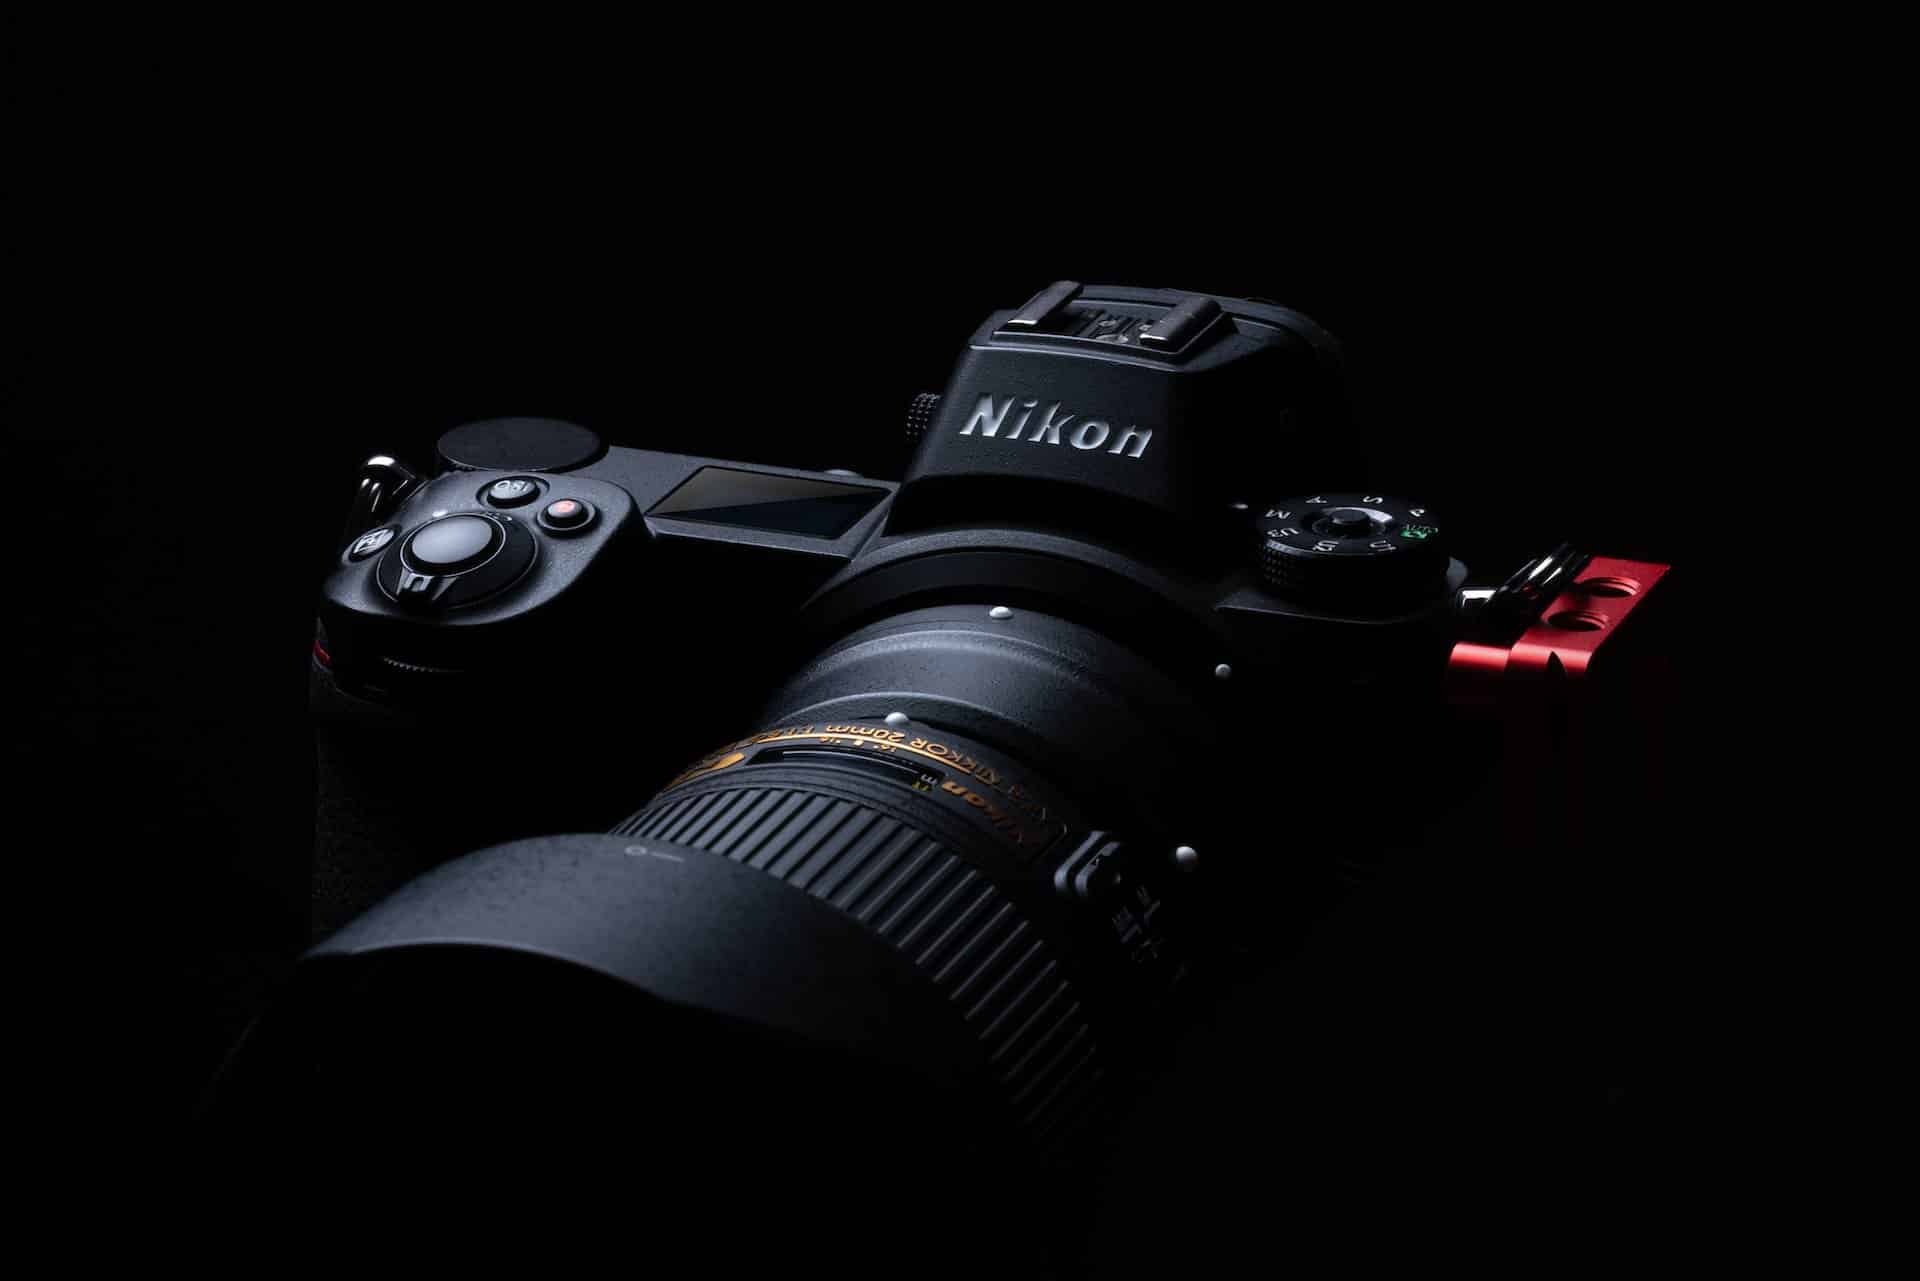 Which Nikon cameras are full-frame?